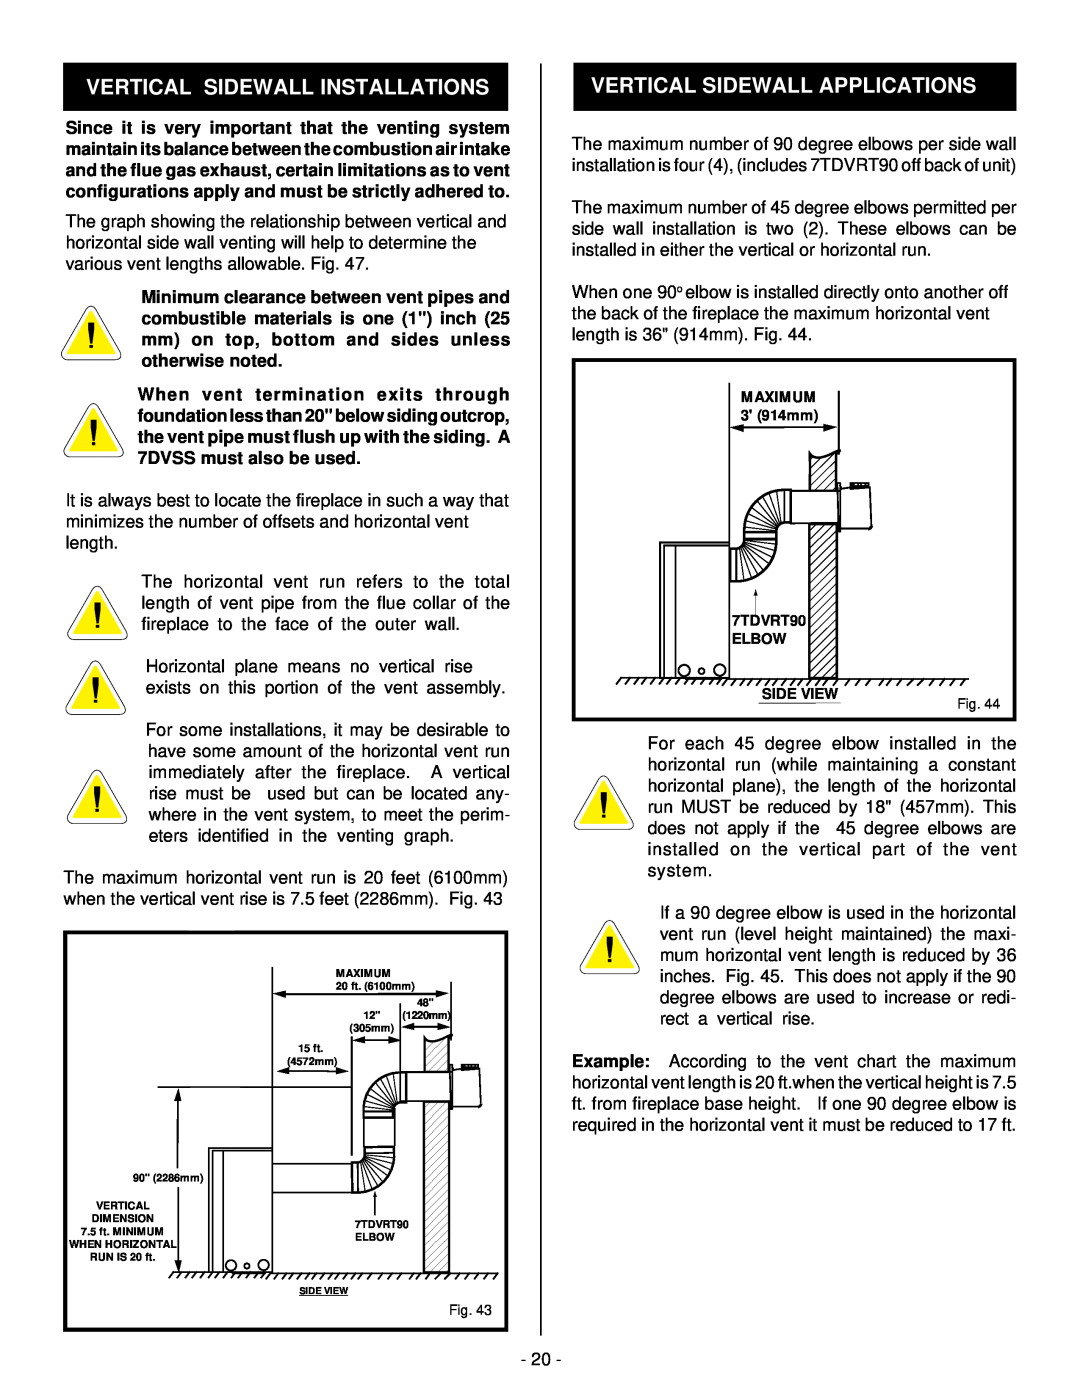 Vermont Casting BHDR36 installation instructions Vertical Sidewall Installations, Vertical Sidewall Applications 